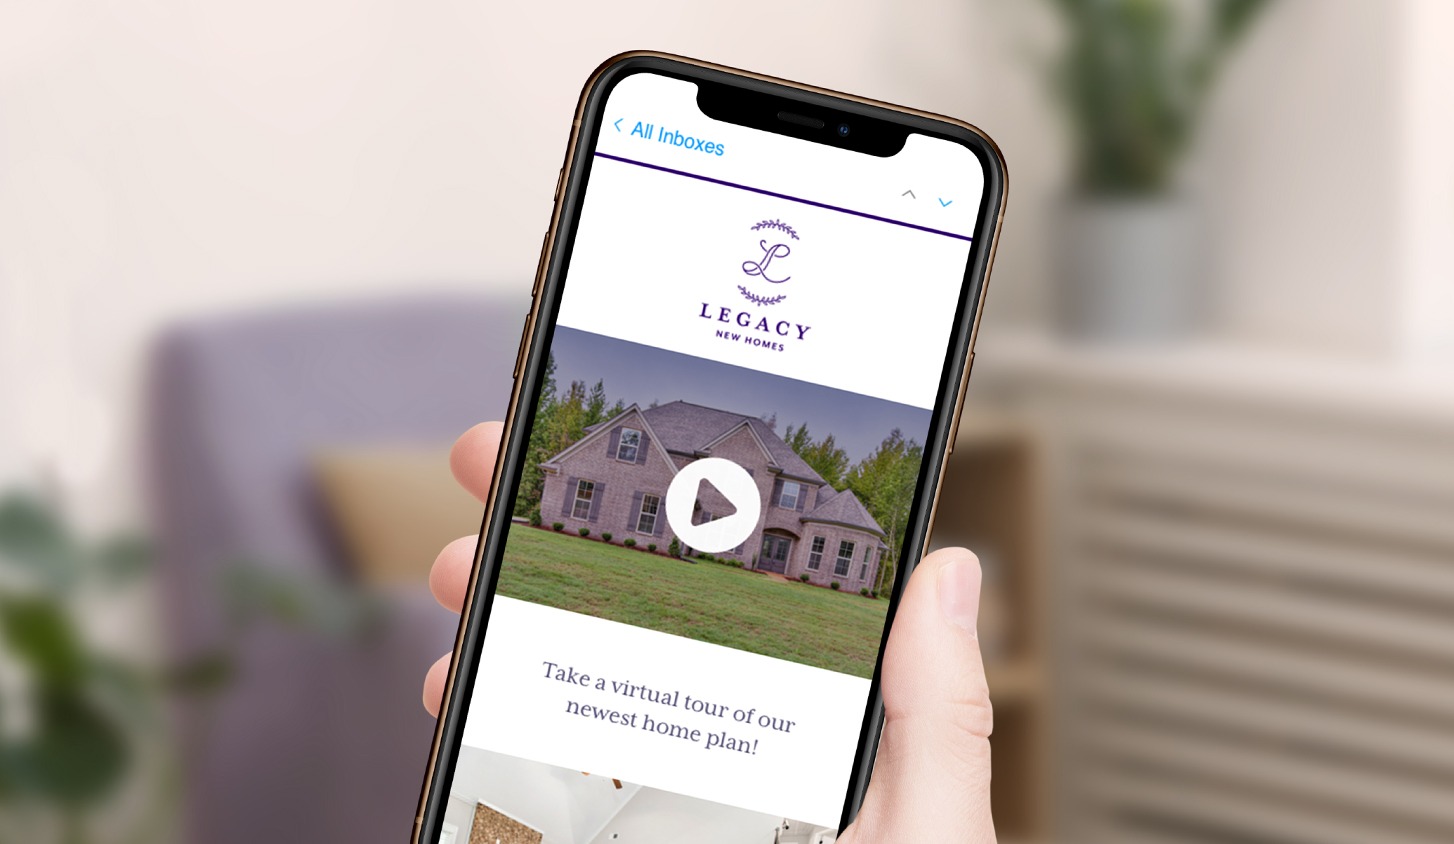 Person receiving email from Legacy New Homes